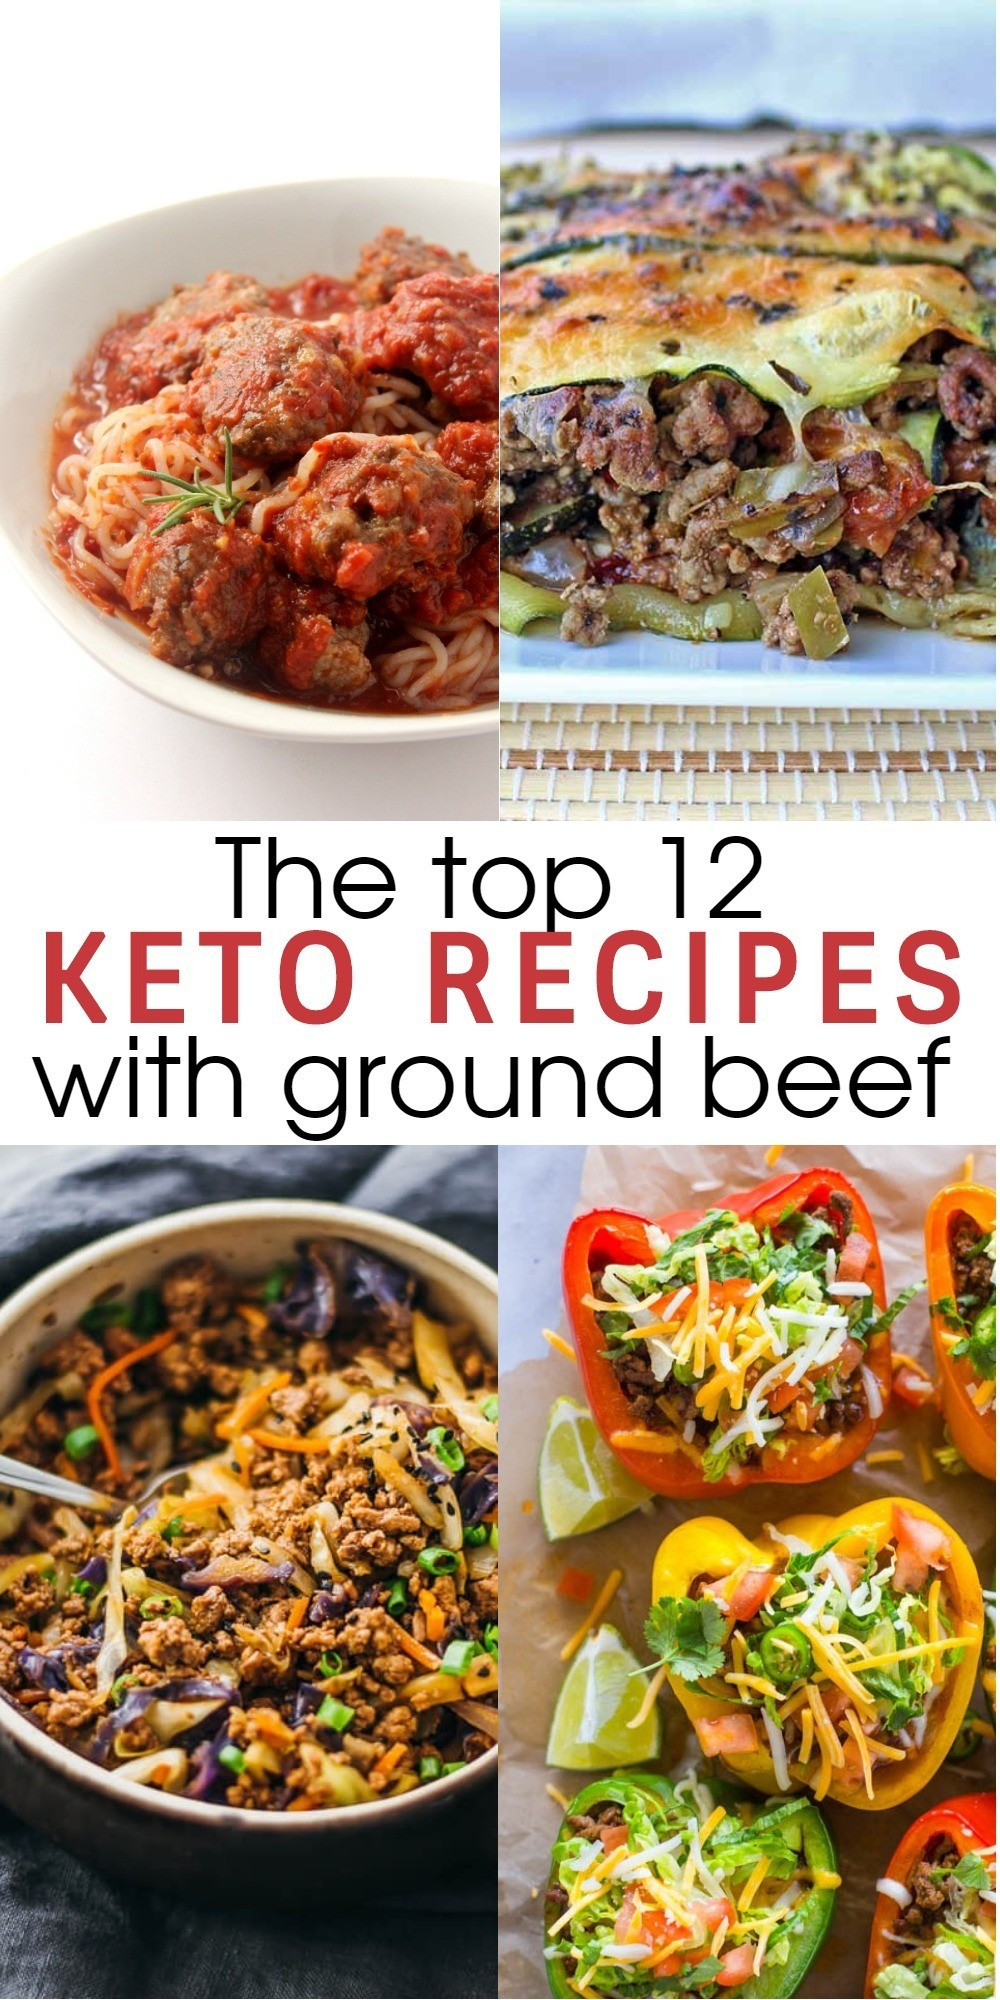 Ground Beef Recipes Healthy Keto
 12 Flavorful and Easy Keto Recipes With Ground Beef To Try